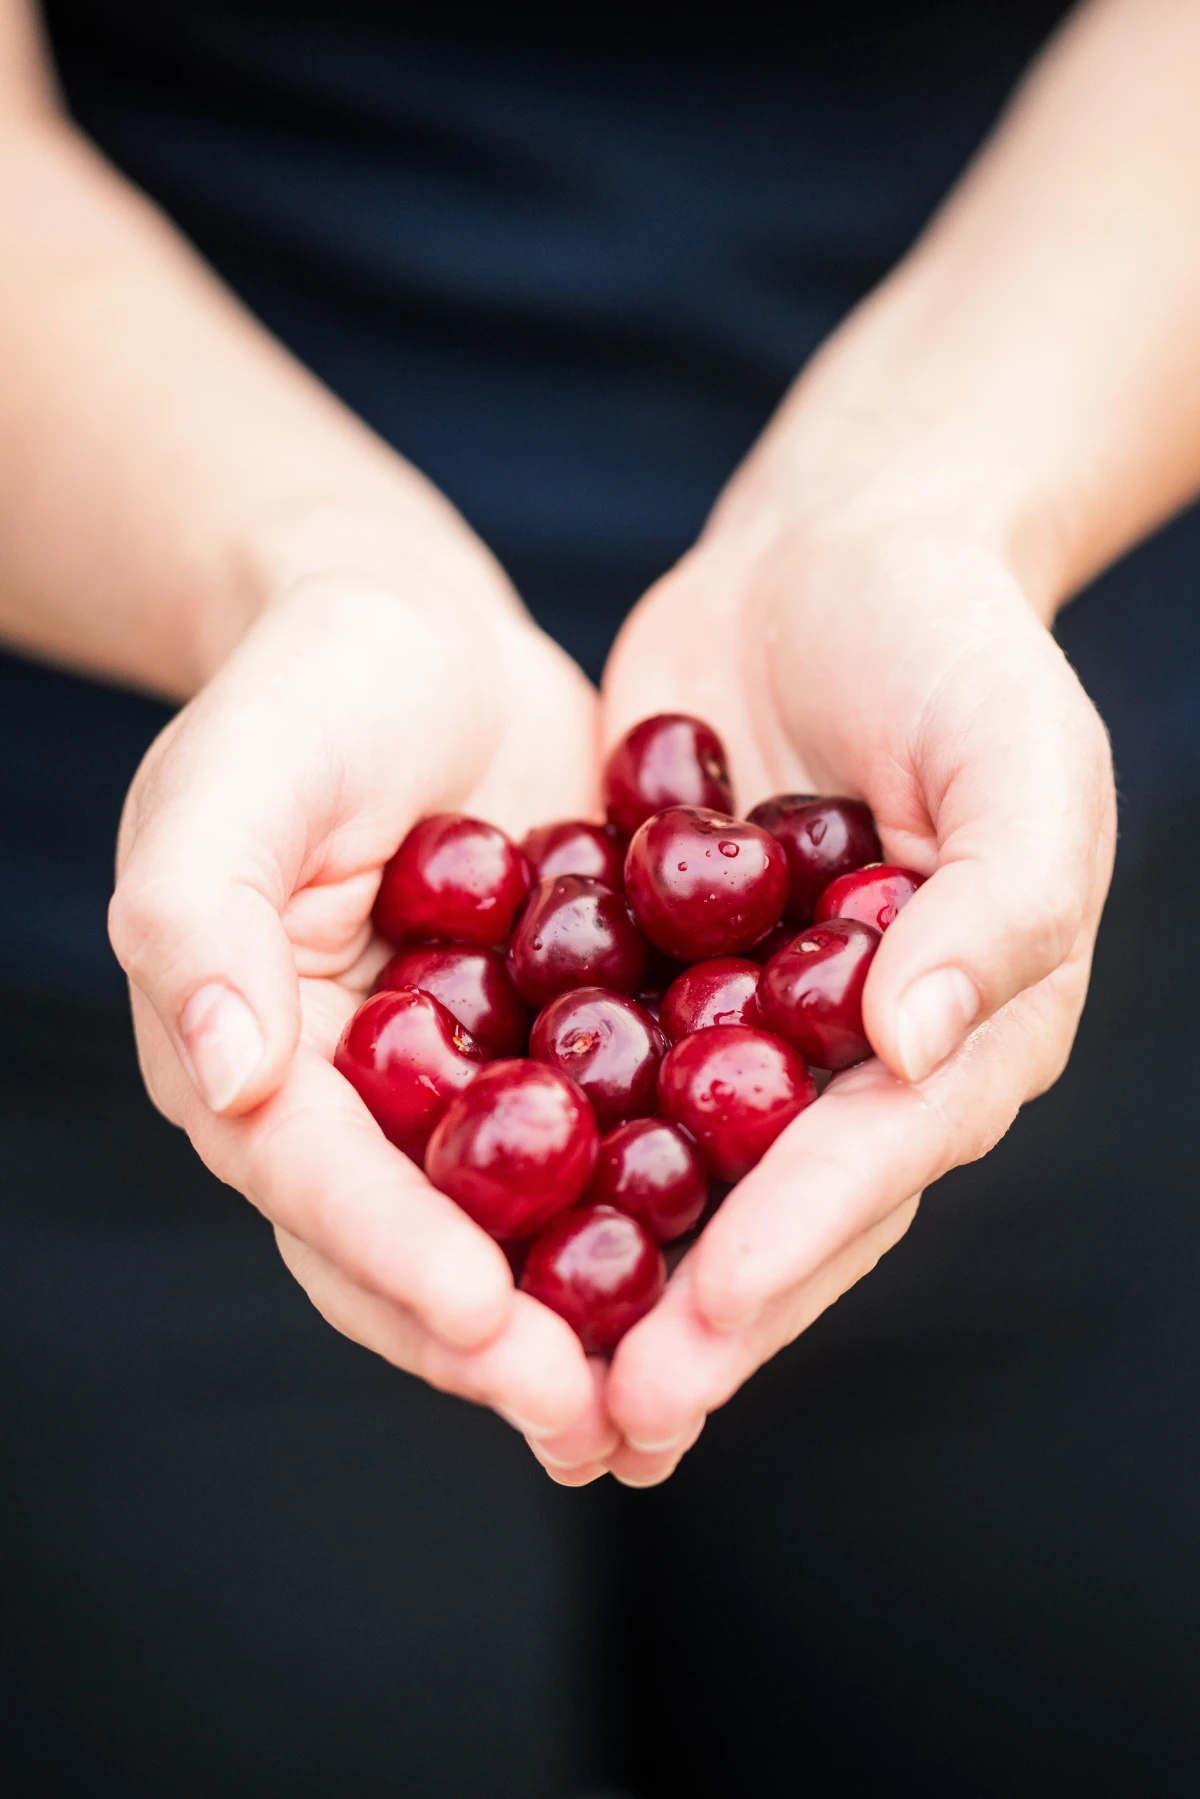 how to remove cherry stains cherries in palm of hands